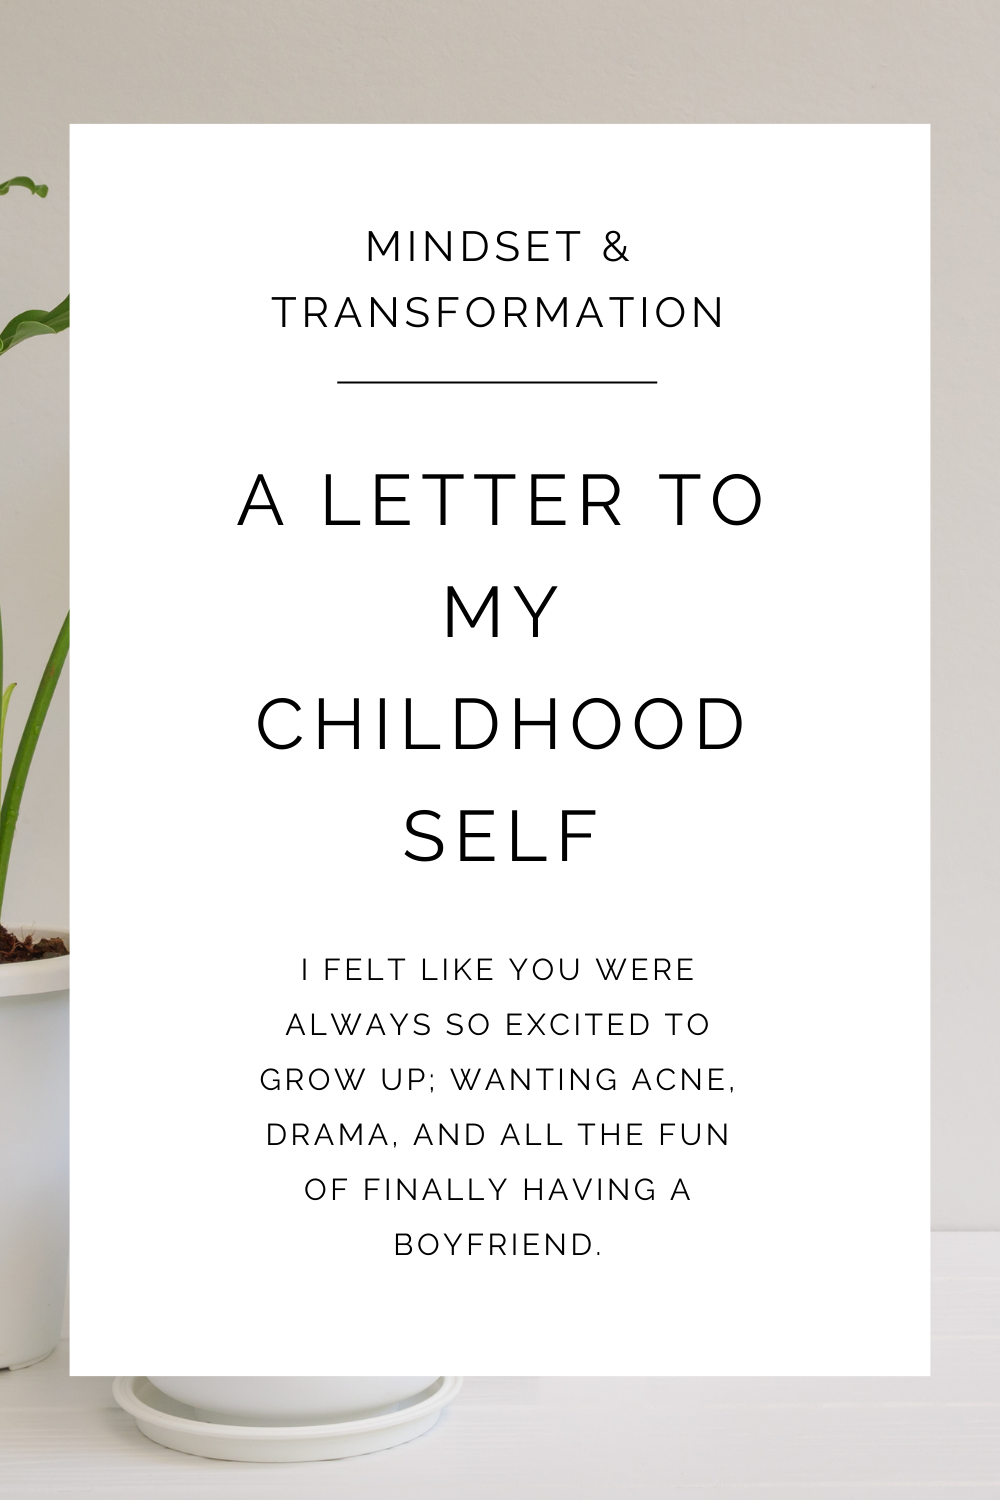 A Letter to My Childhood Self